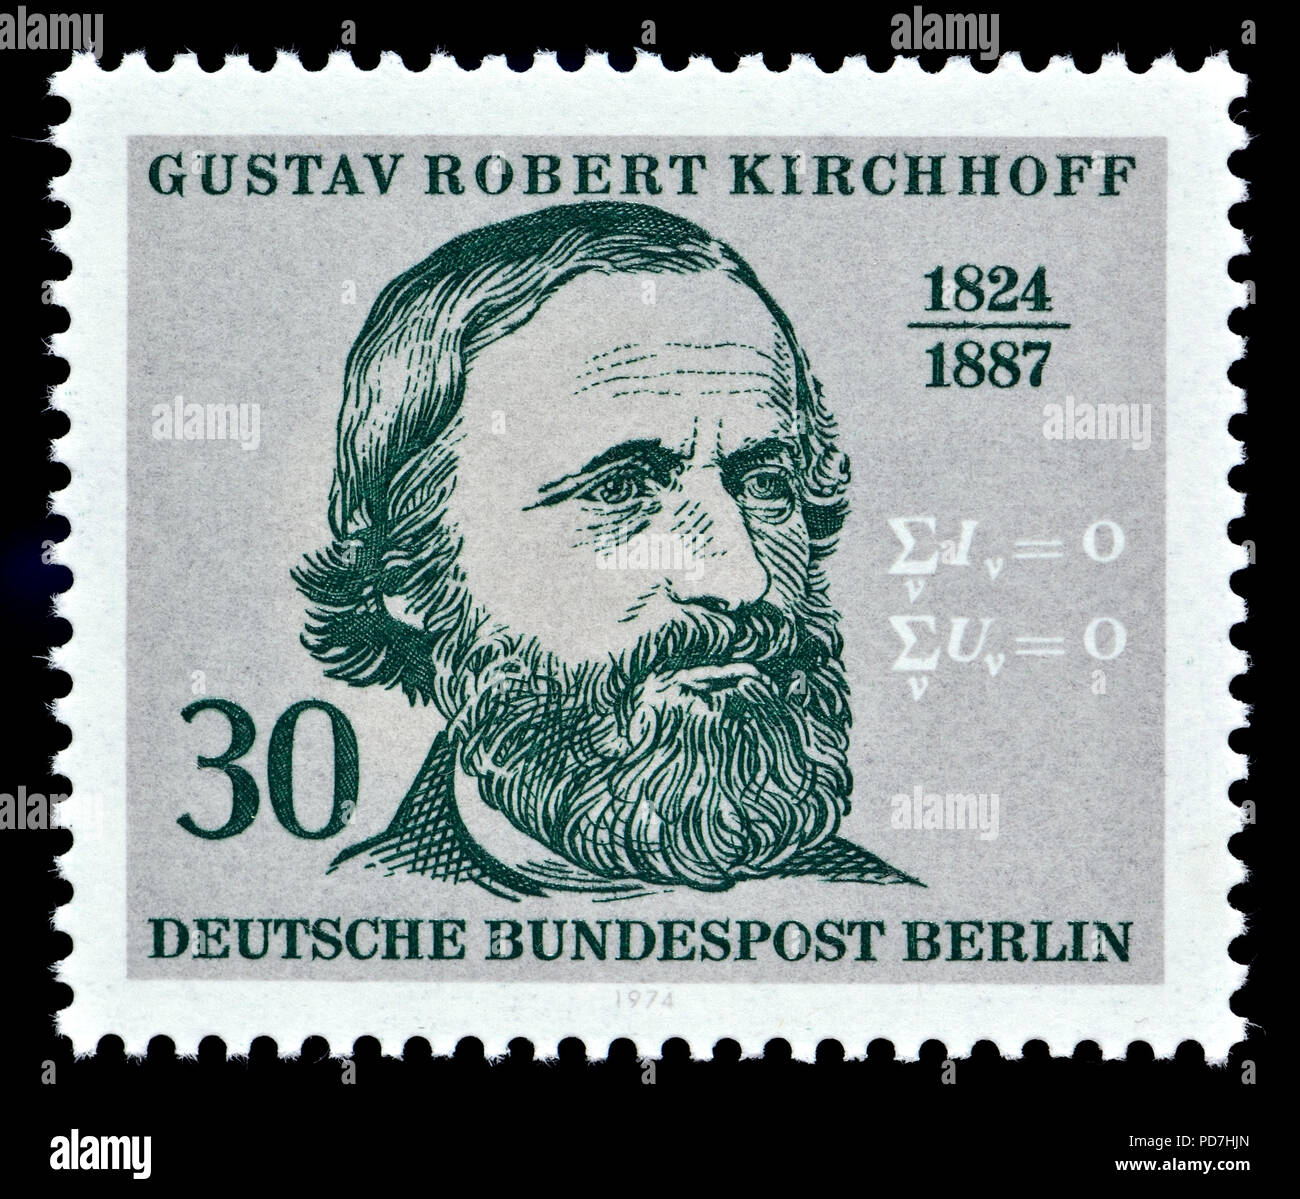 German postage stamp (Berlin: 1974) : Gustav Robert Kirchhoff (1824 – 1887) German physicist who contributed to the fundamental understanding of elect Stock Photo